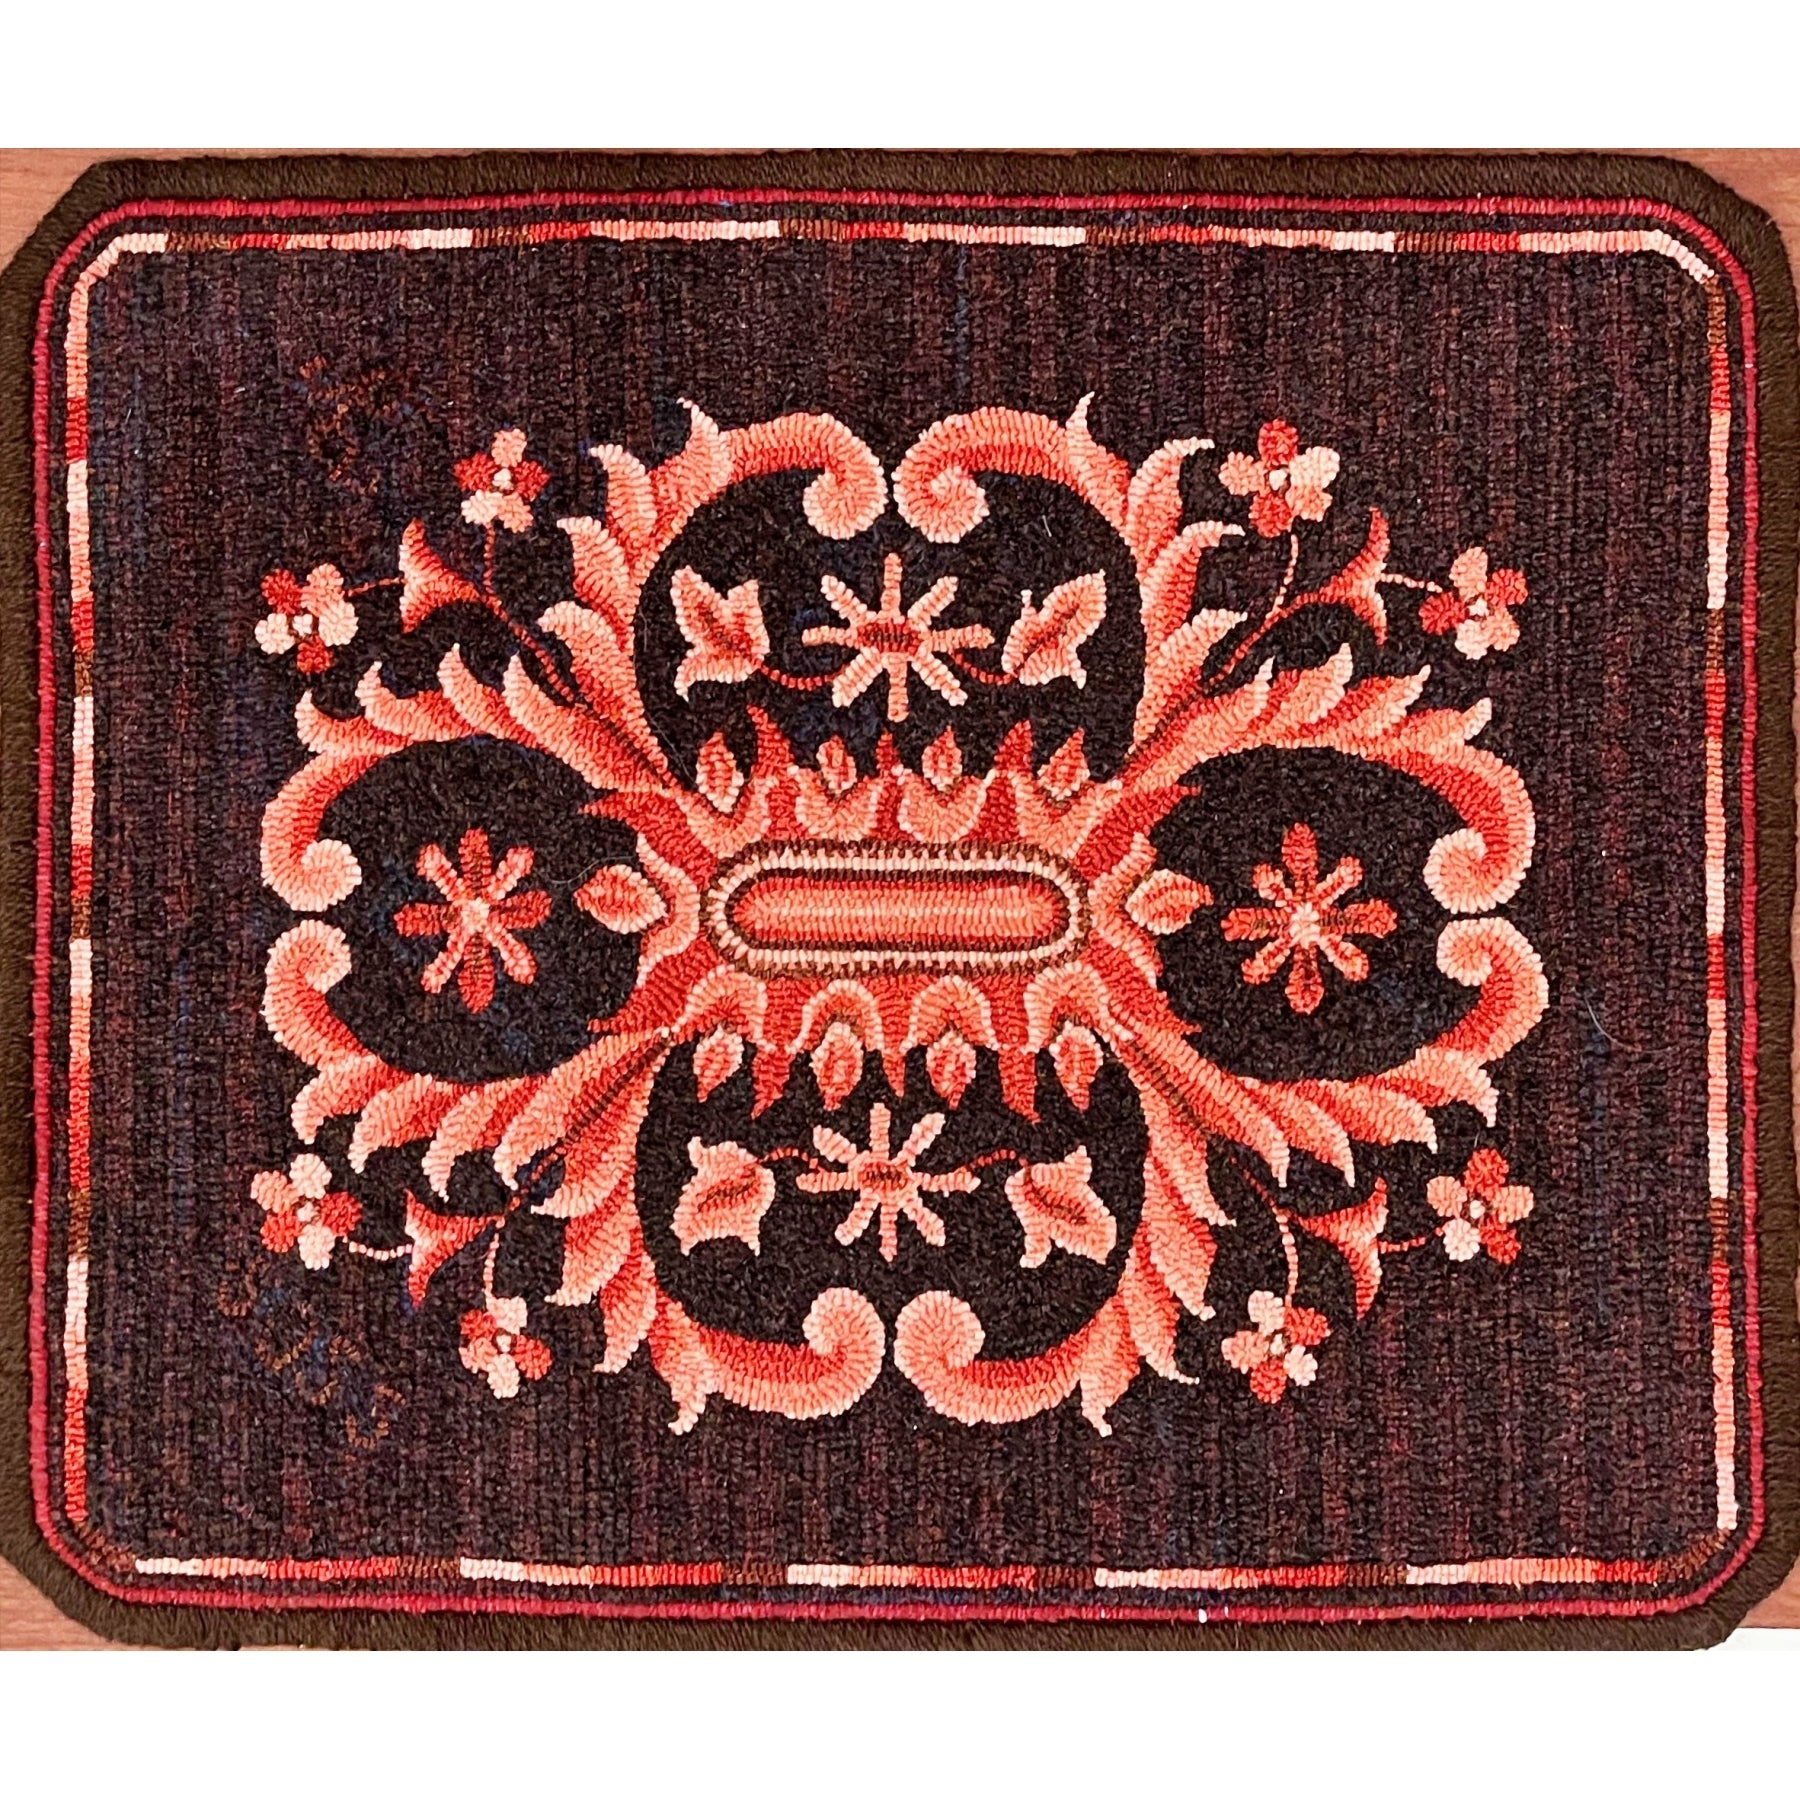 Taba, rug hooked by Jane McGown Flynn